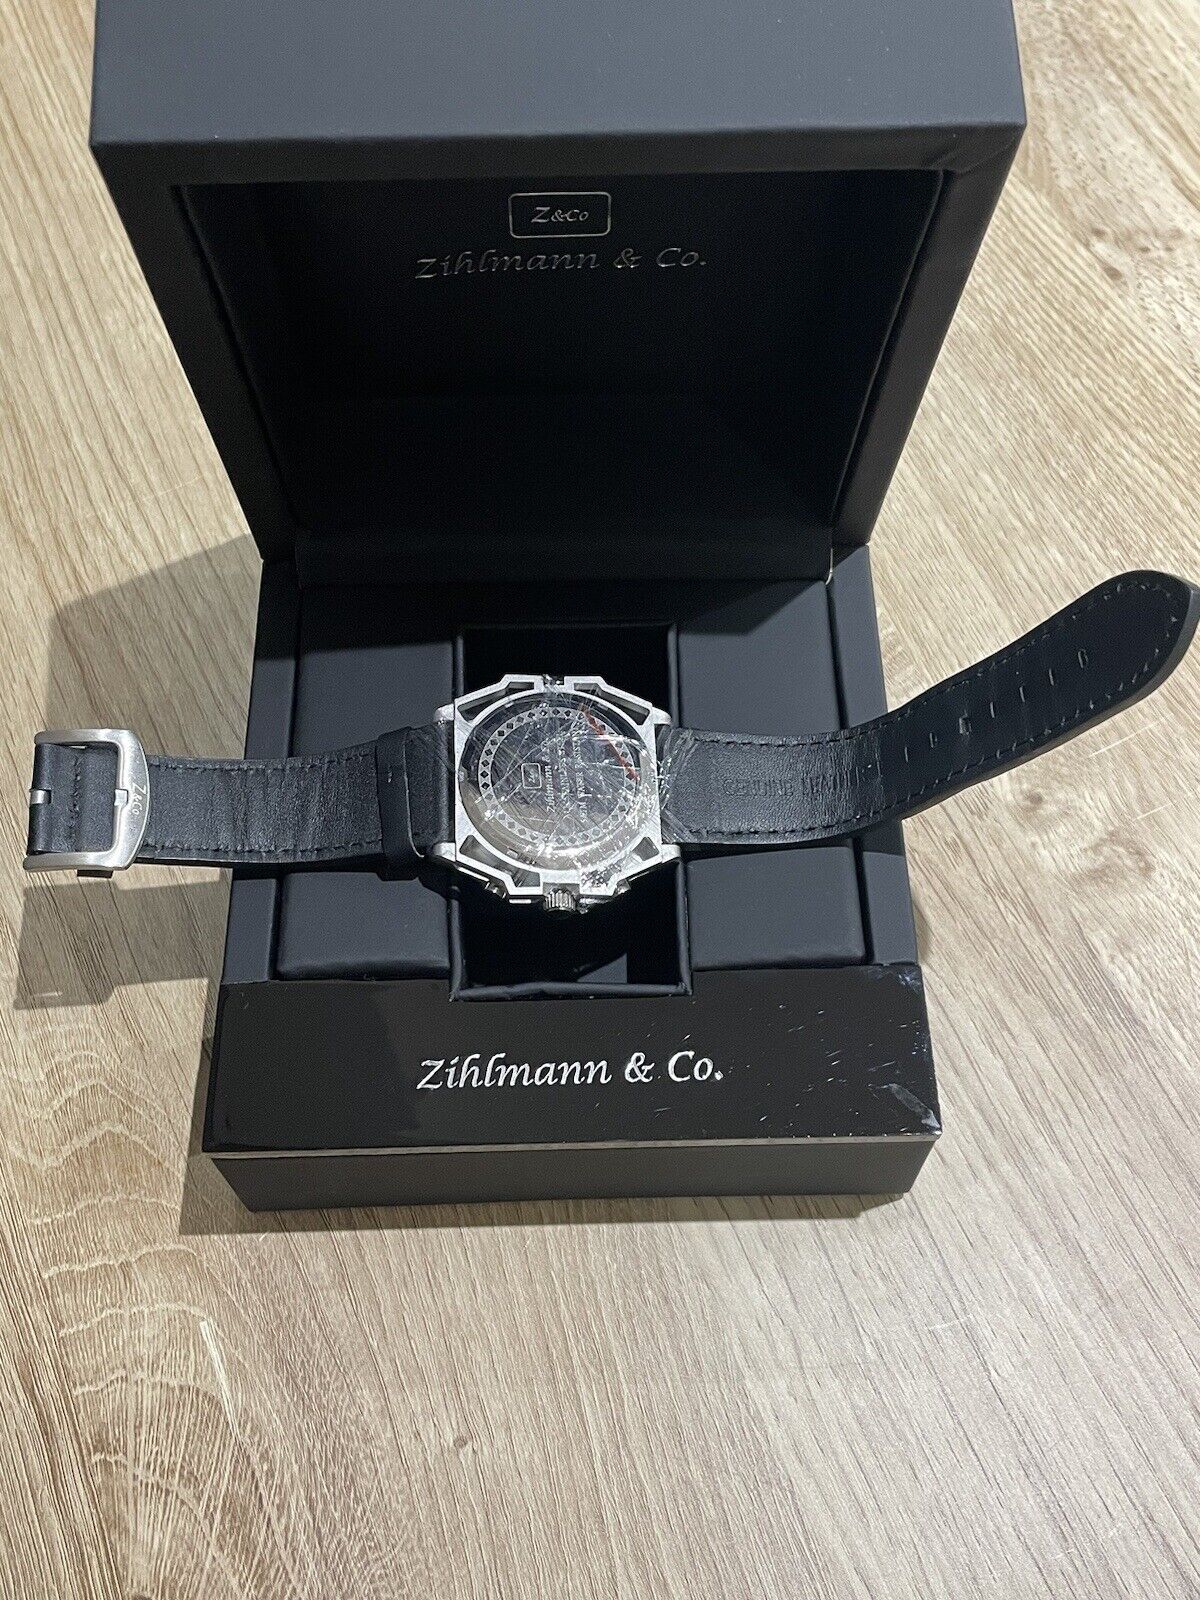 MENS ZIHLMANN & CO CHRONOGRAPH WATCH BLACK DIAL LEATHER STRAP MODEL ZC100 - Westies Watches